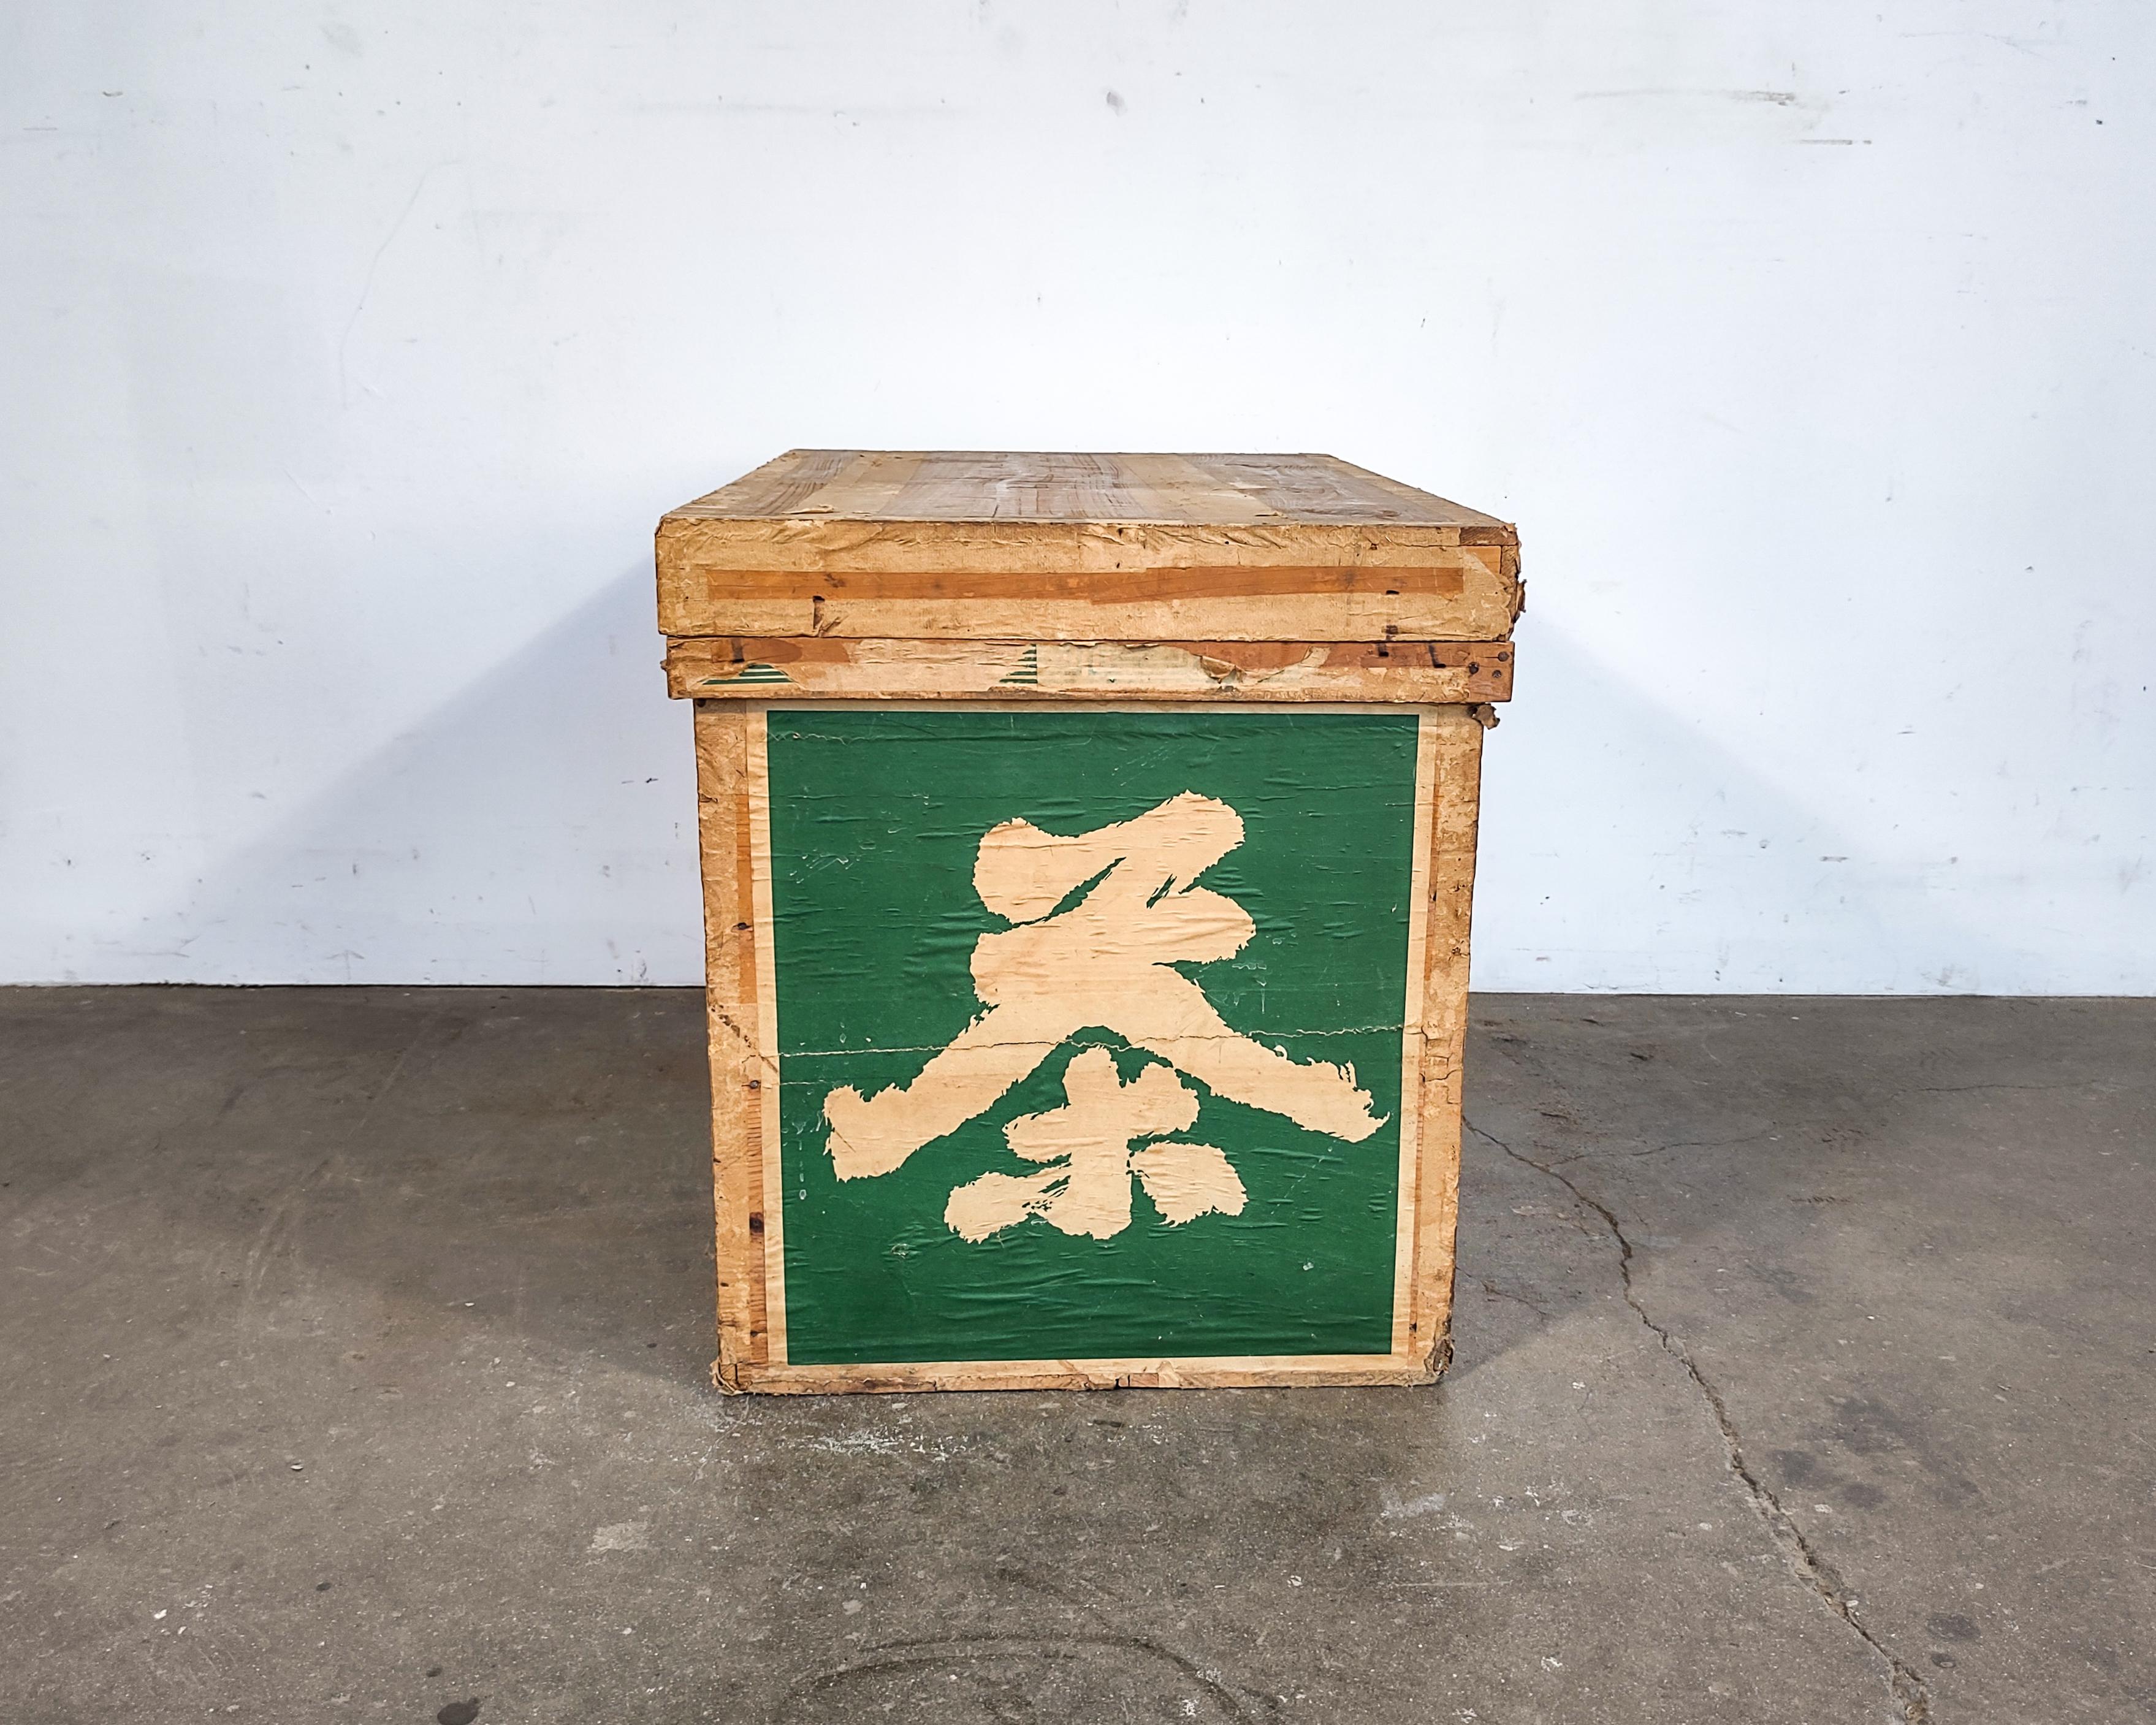 Vintage Japanese cedar wood tea shipping crate circa 1960s. Original graphic and labeling on exterior, interior aluminum lined.
Measures: 17